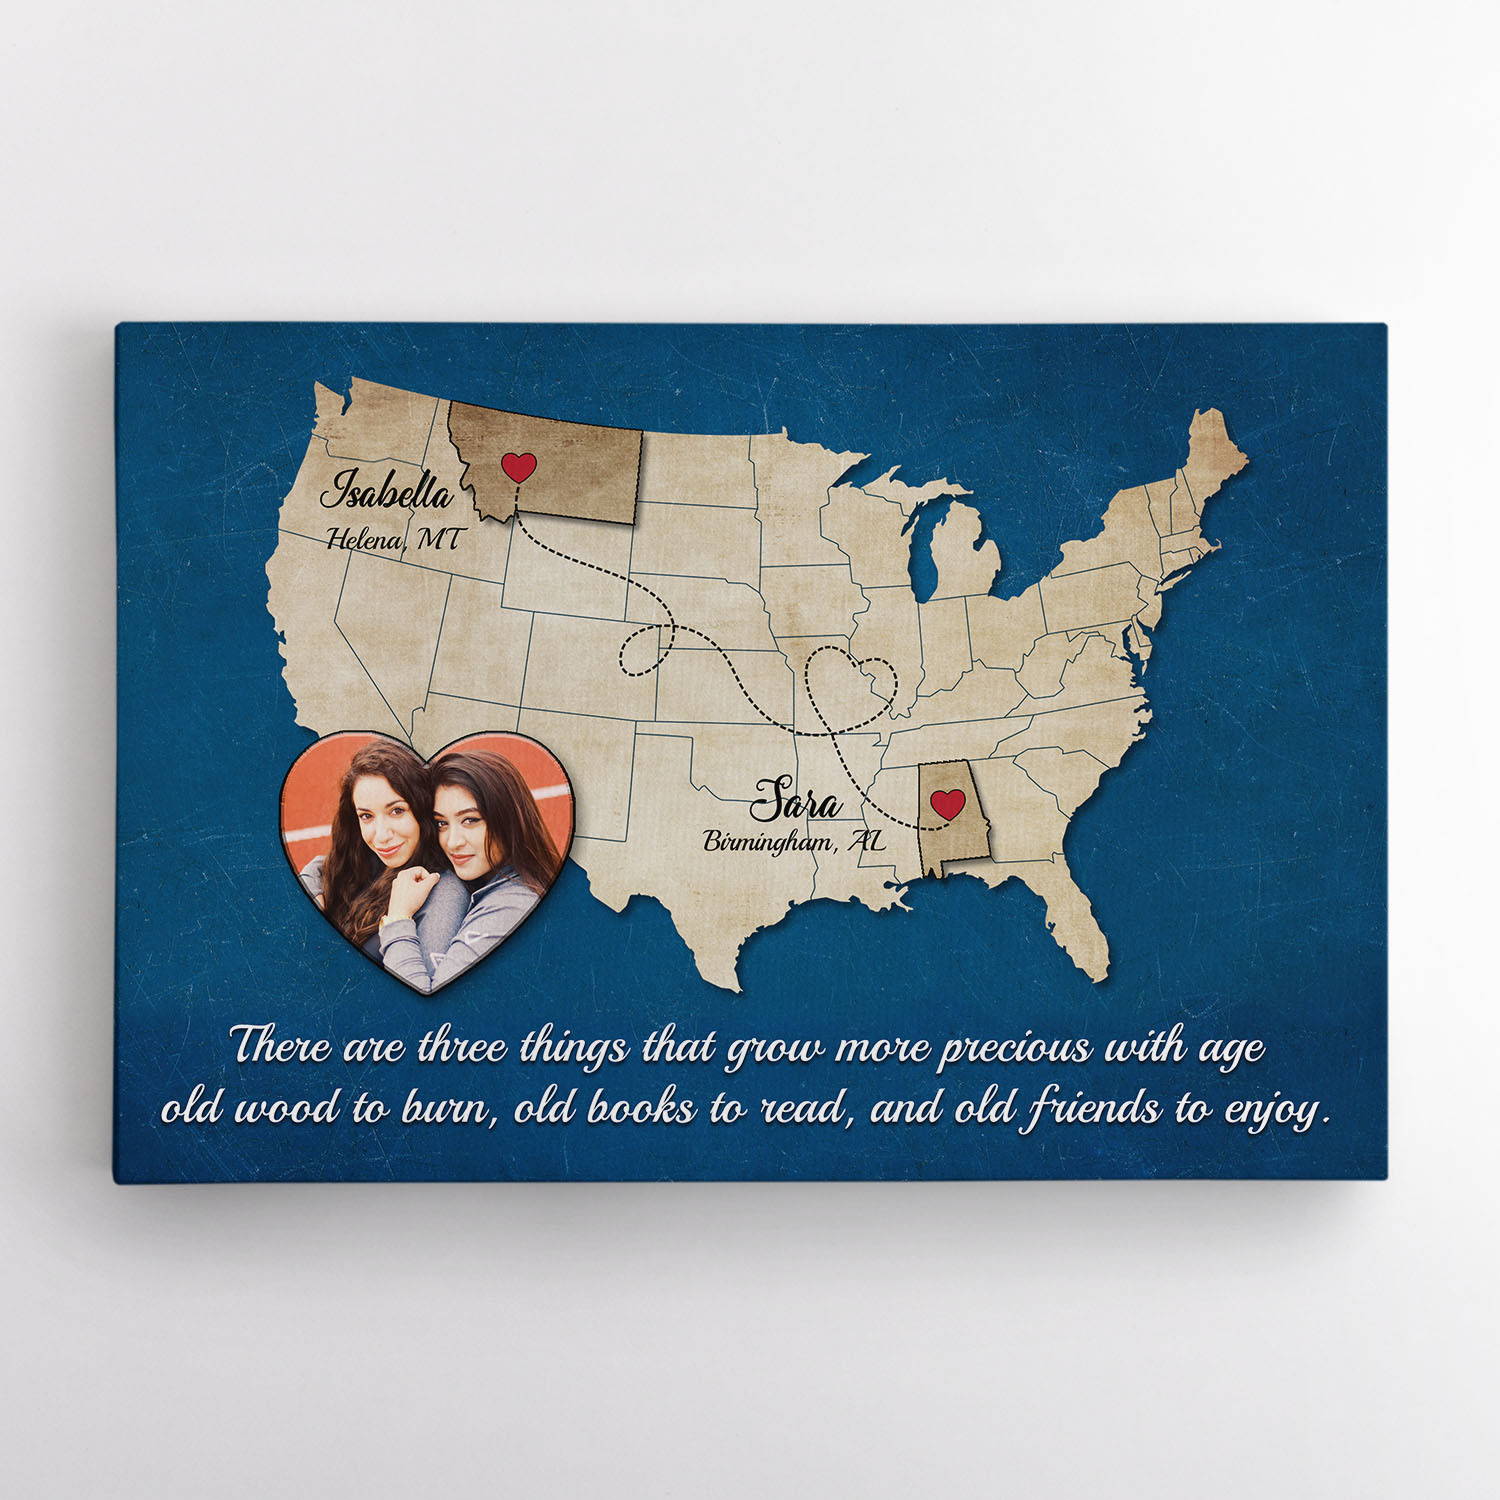 Custom Long Distance US Map Canvas Print Personalized With Photo, Name, and Locations In The Blue Background Color.